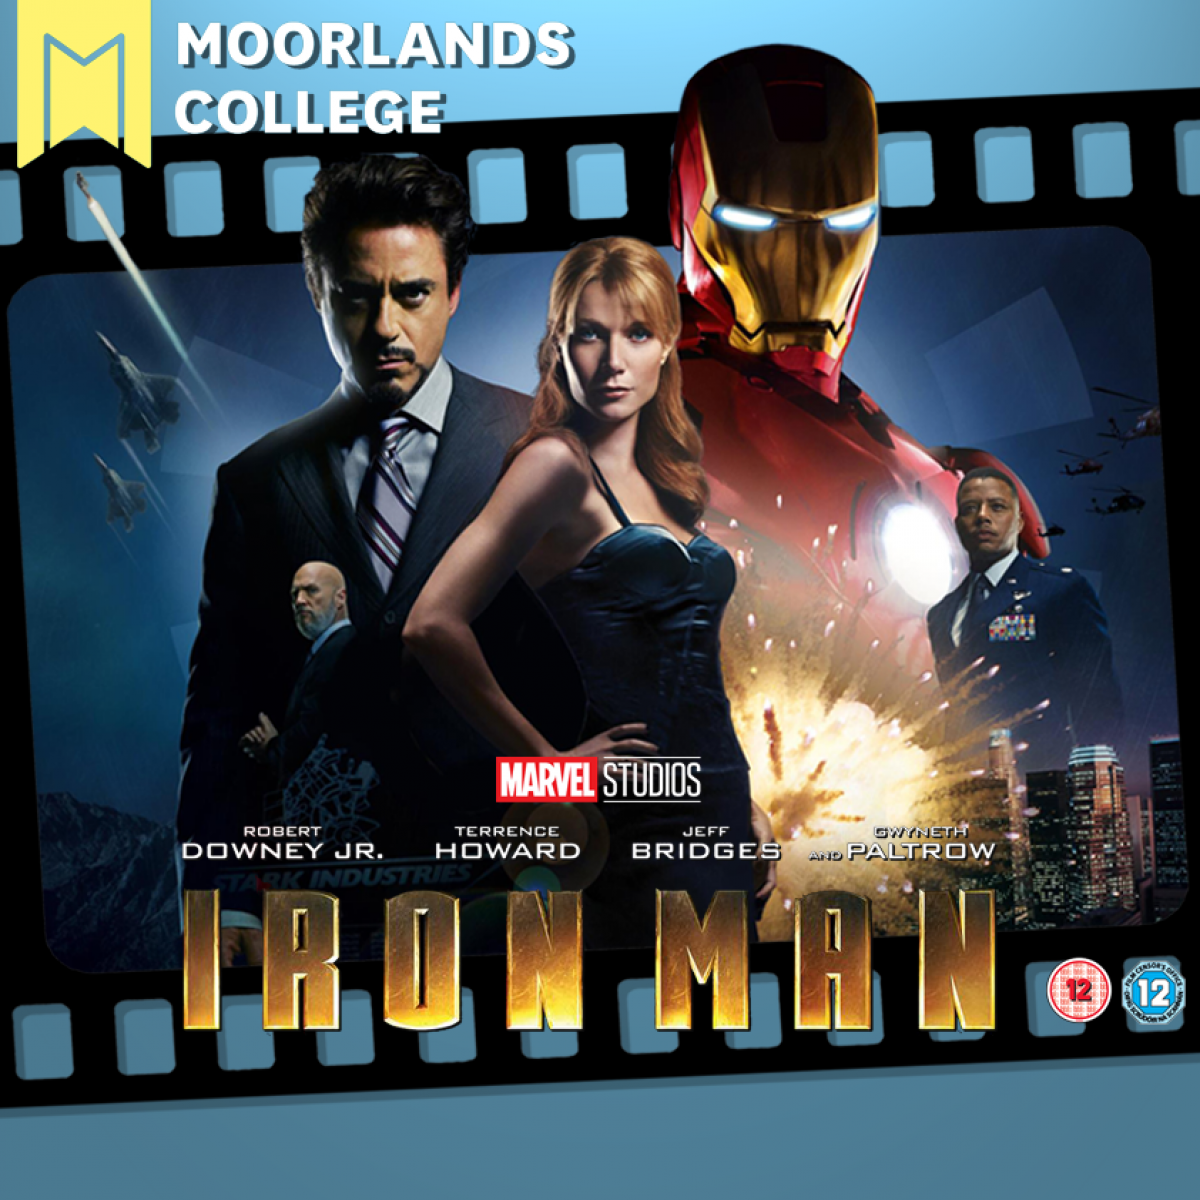 One Door Cinema Club will be going back to its theolgical and entertainment roots this May with Iron Man at Moorlands College.